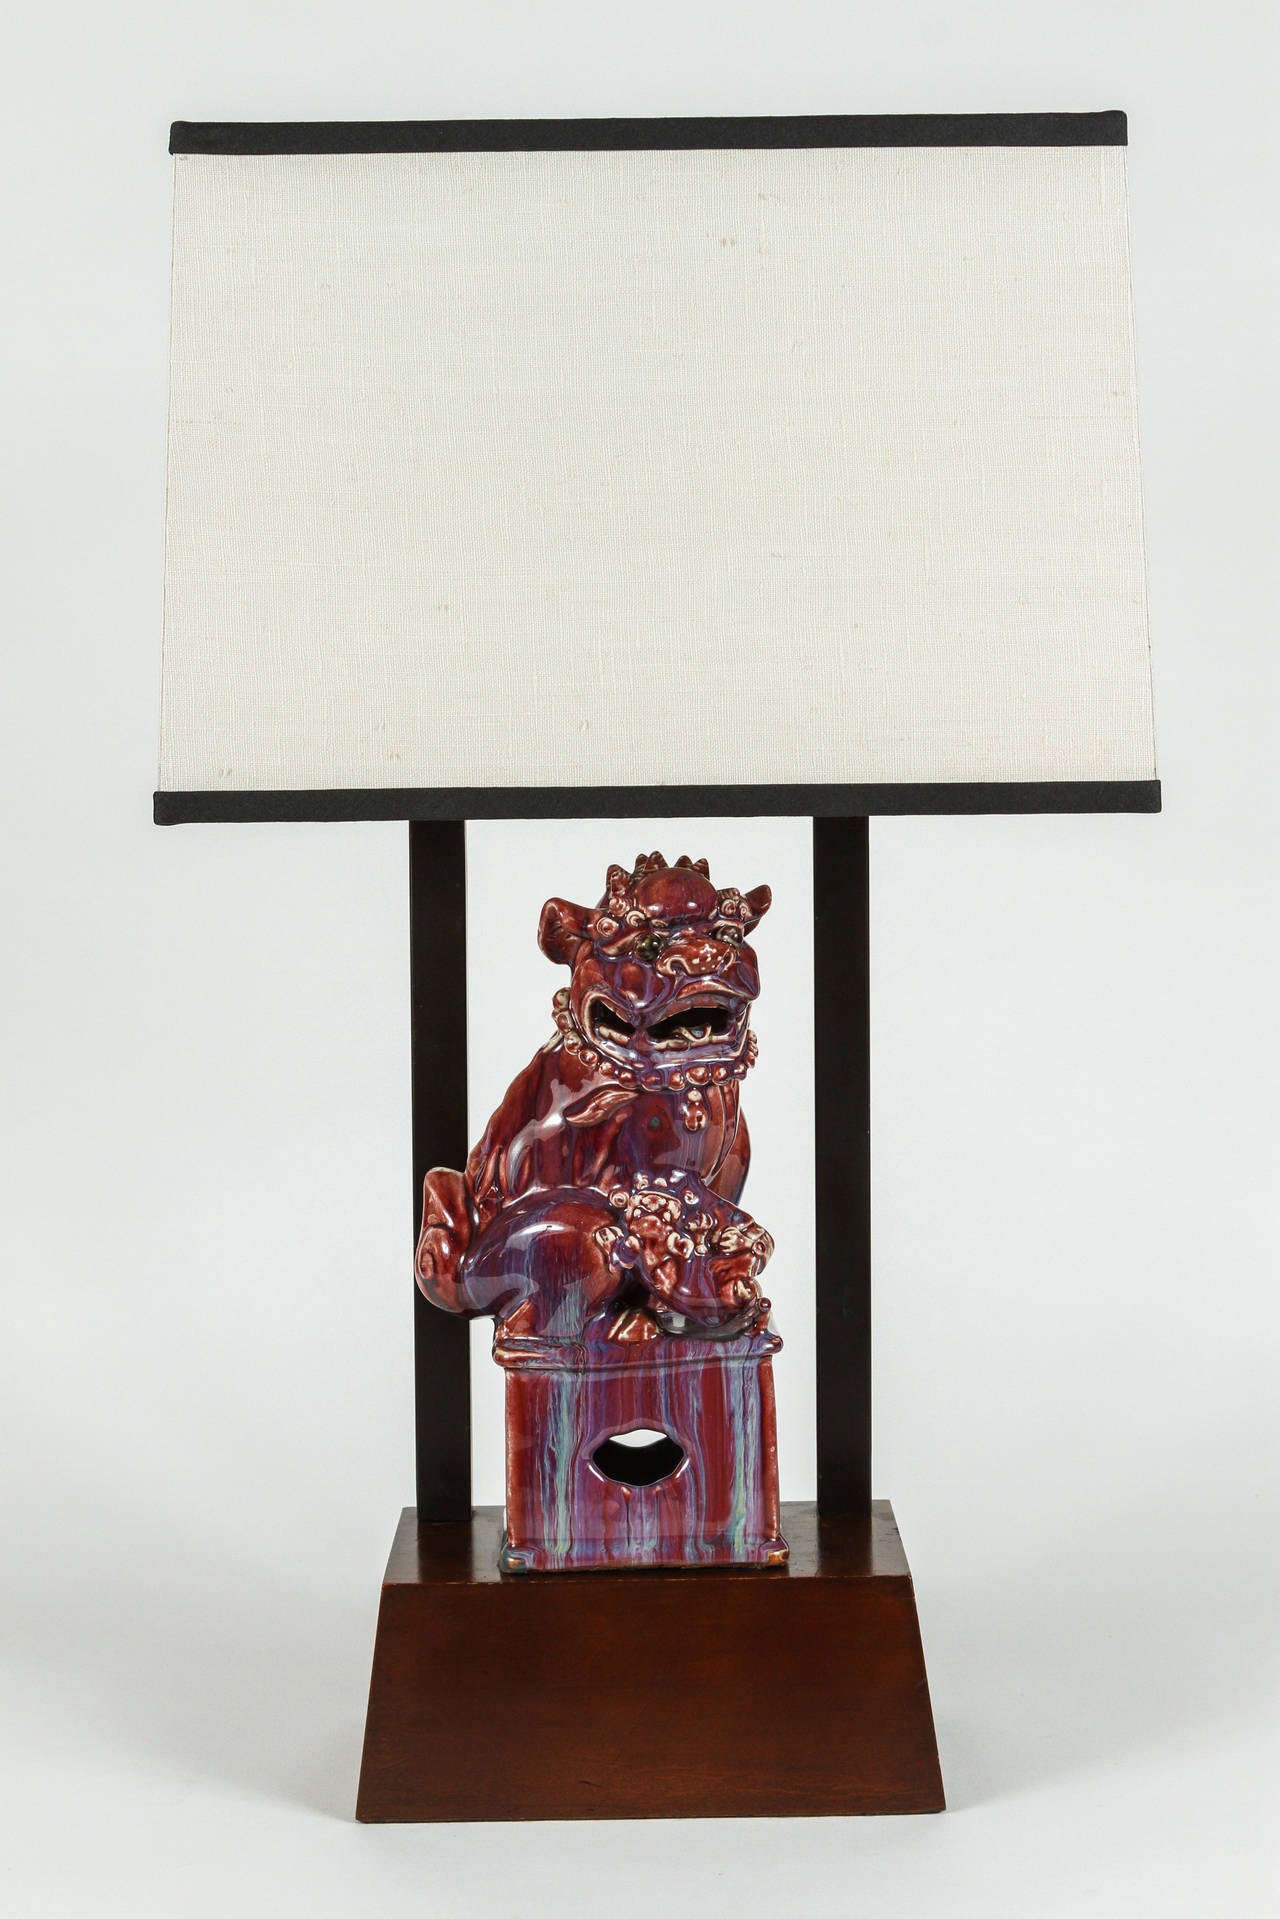 Glazed Armature Lamp Featuring a Chinese Foo Dog by William Haines